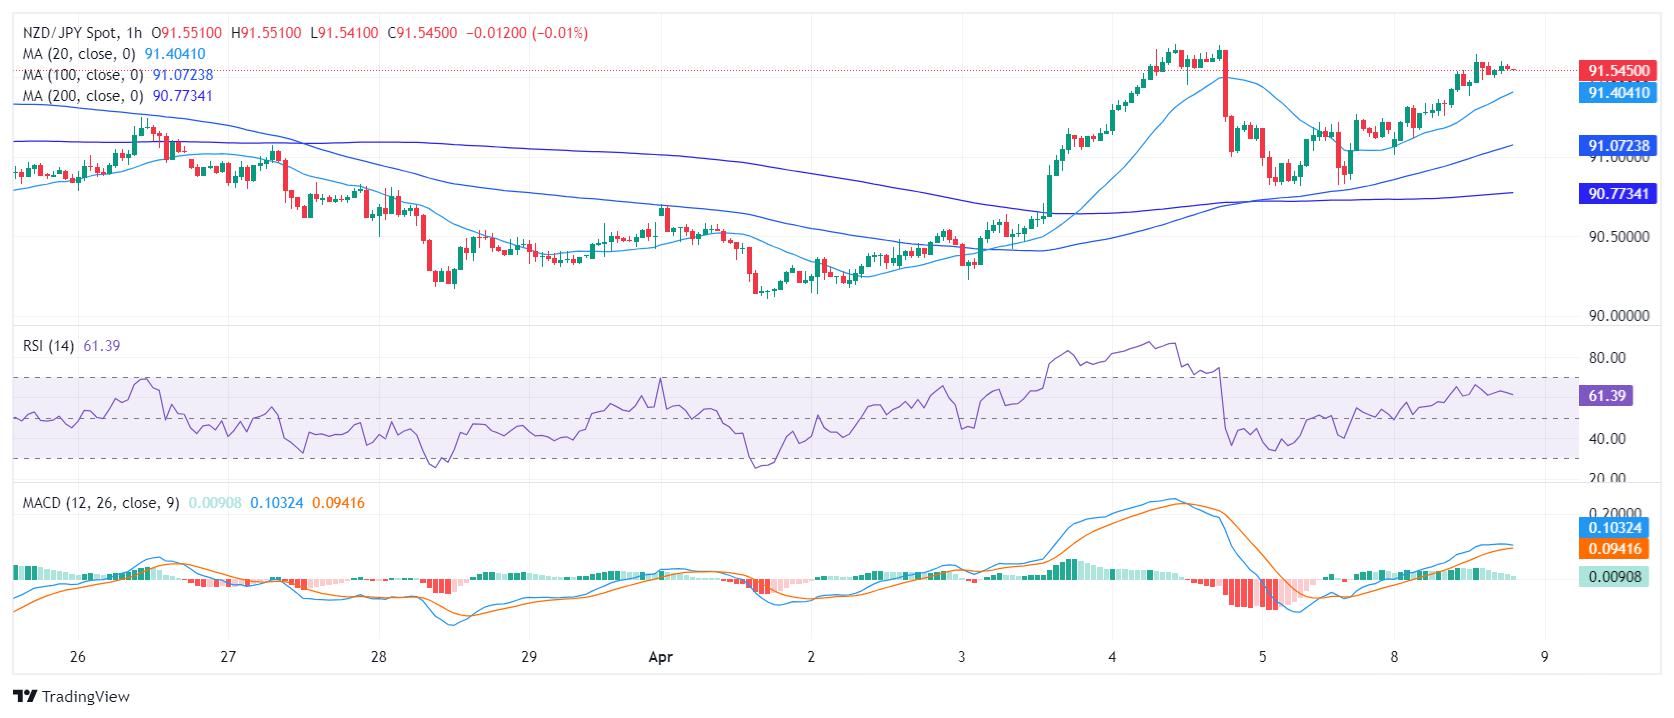 NZD/JPY Price Analysis: NZD Bulls fuel an upward trend, signs of slowing momentum observed